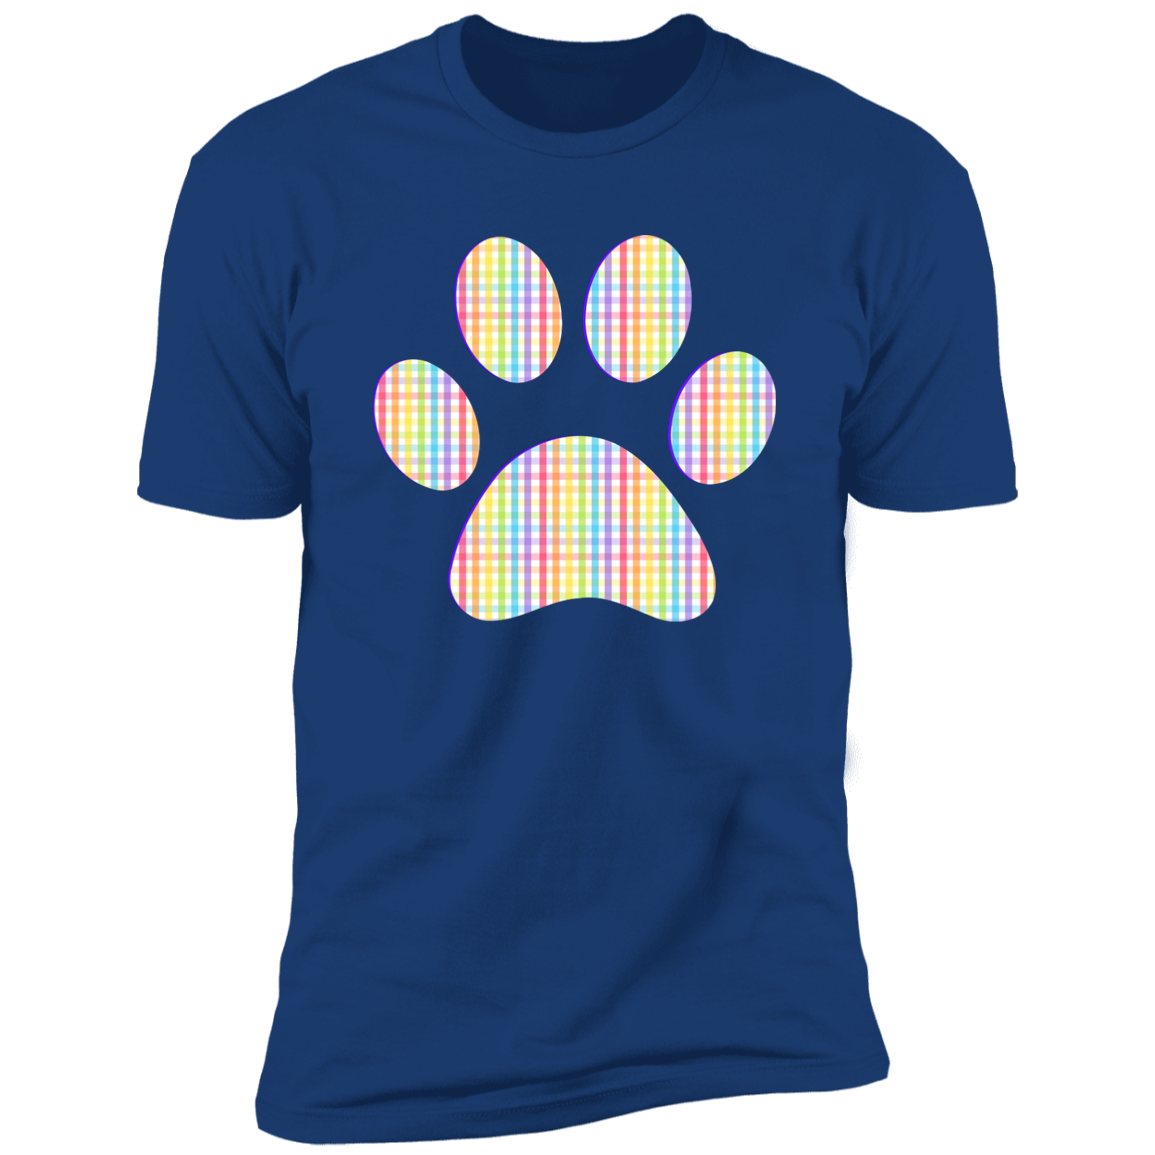 Pride Paw (Gingham) Pride T-shirt, Paw Pride Dog Shirt for humans, in royal blue